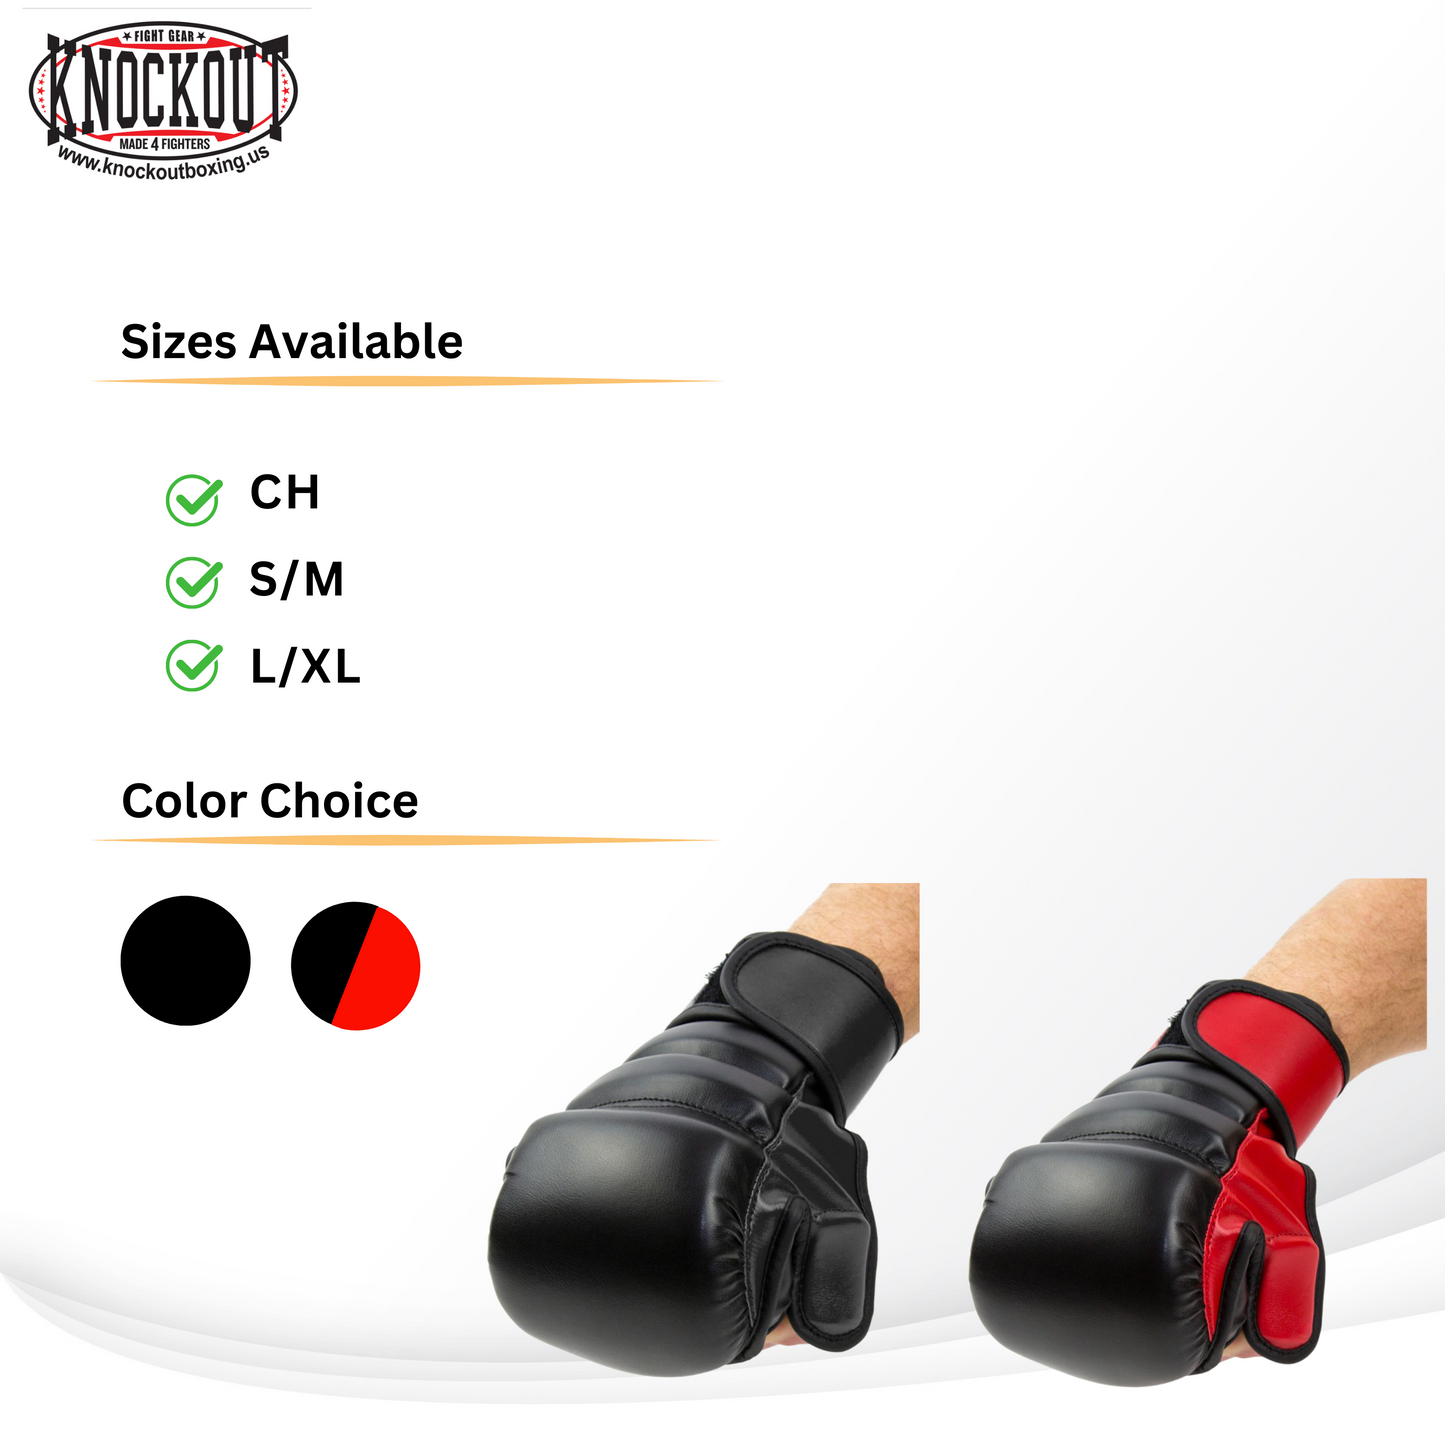 MMA Gloves, Hybrid Open Palm Shooter fighting MMA gloves Men Women, Double Wrap Wrist Support, Cage Fighting Combat Sports, Muay Thai, Punching Bag kickboxing gloves